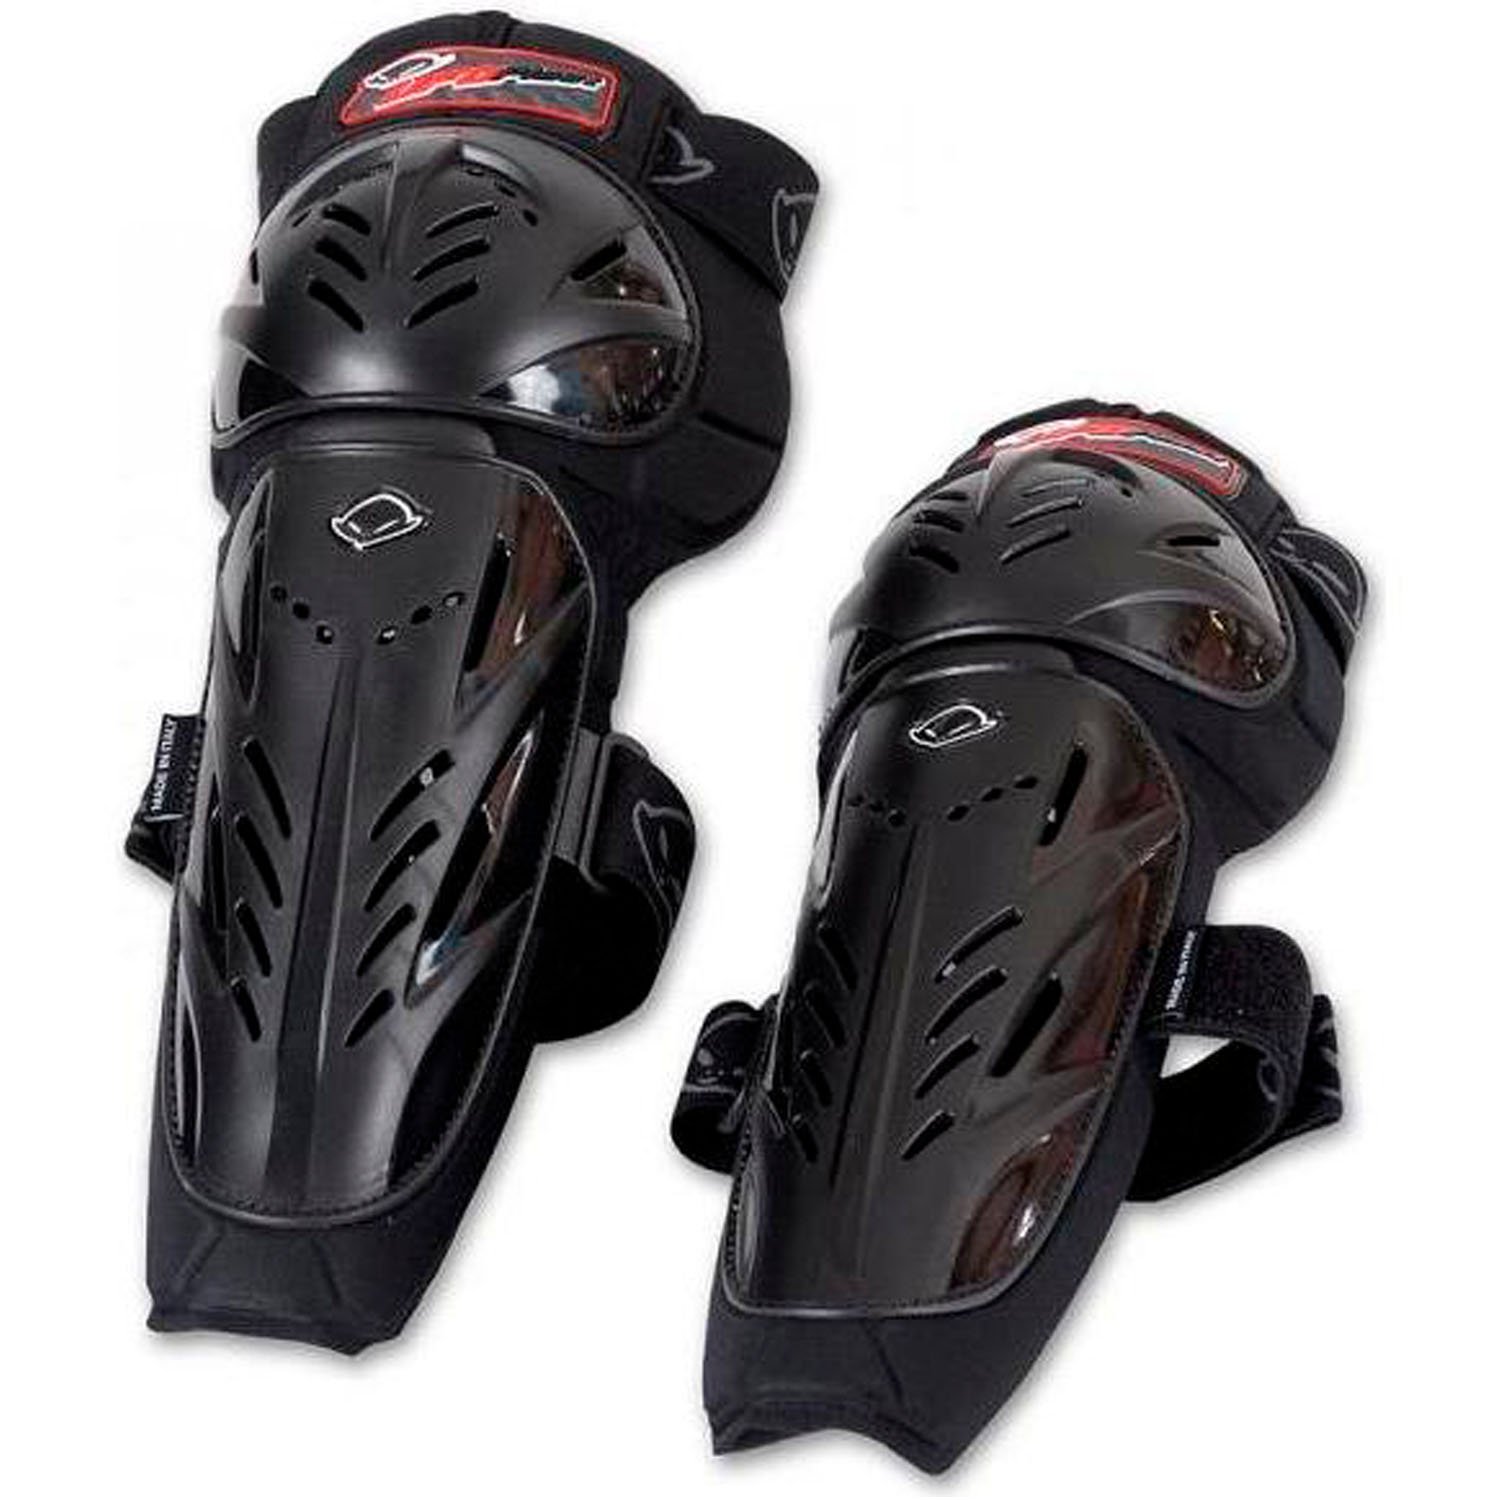 Защита колена NIDECKER 2022-23 Limited Knee-Shin Guards Black, взрослый, GI02021 magnetism kneepad self heating male and female knee pads warm thick cold magnetic therapy for the elderly reconcile qi blood